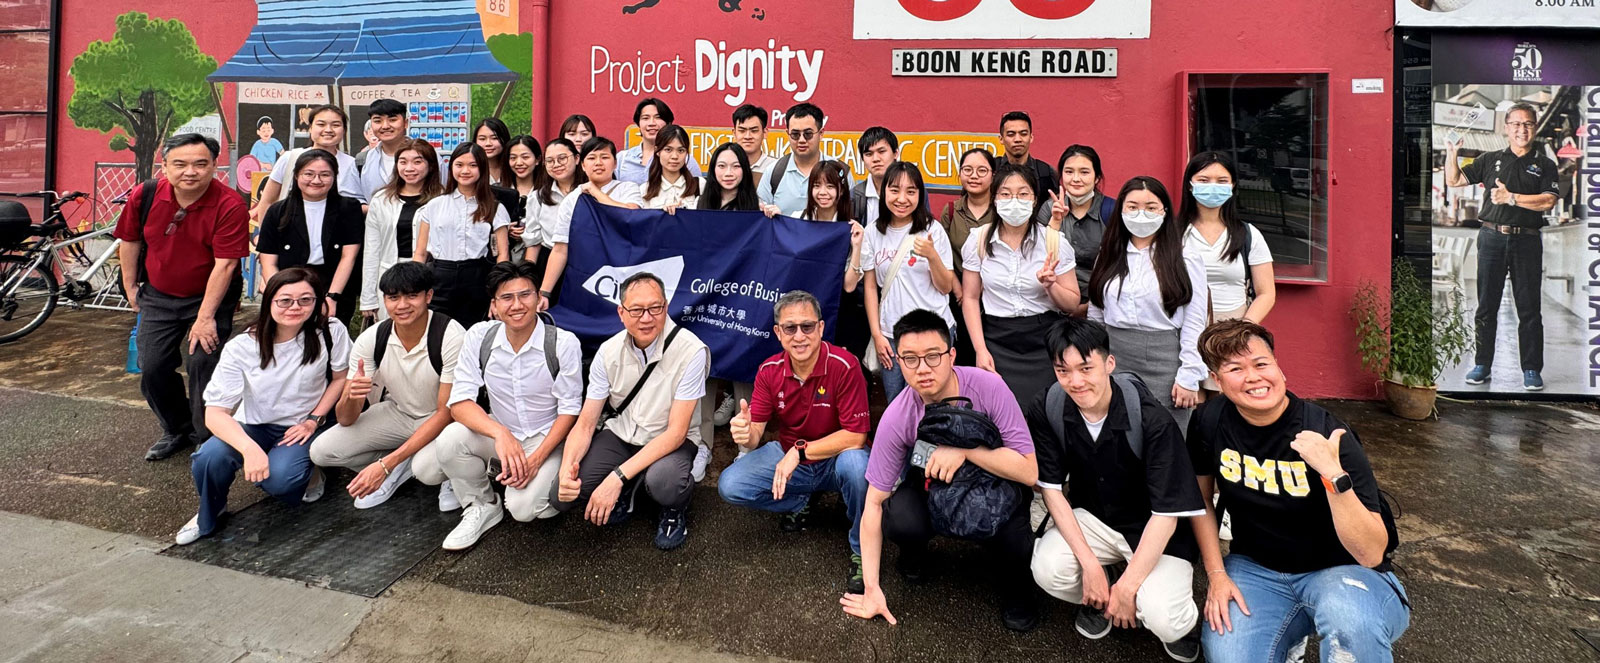 CB students explore innovative ideas in Singapore sustainability field trip